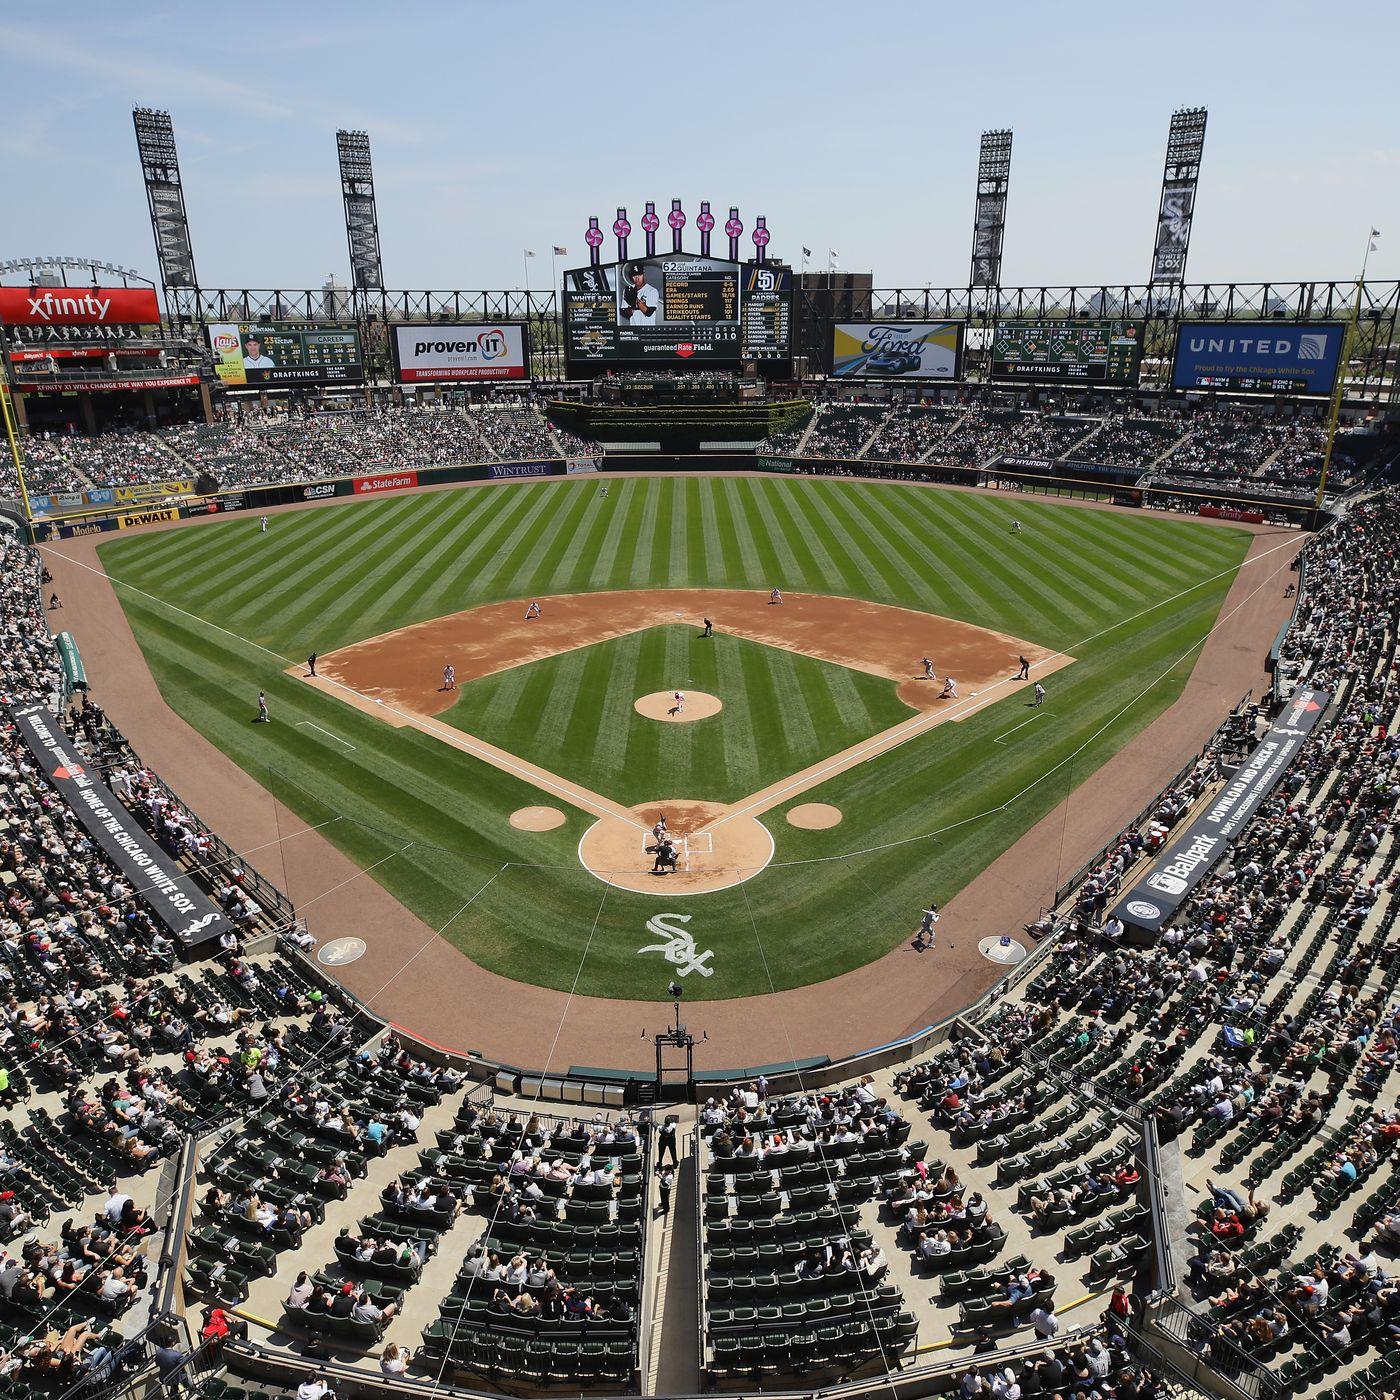 white sox play by play 2016